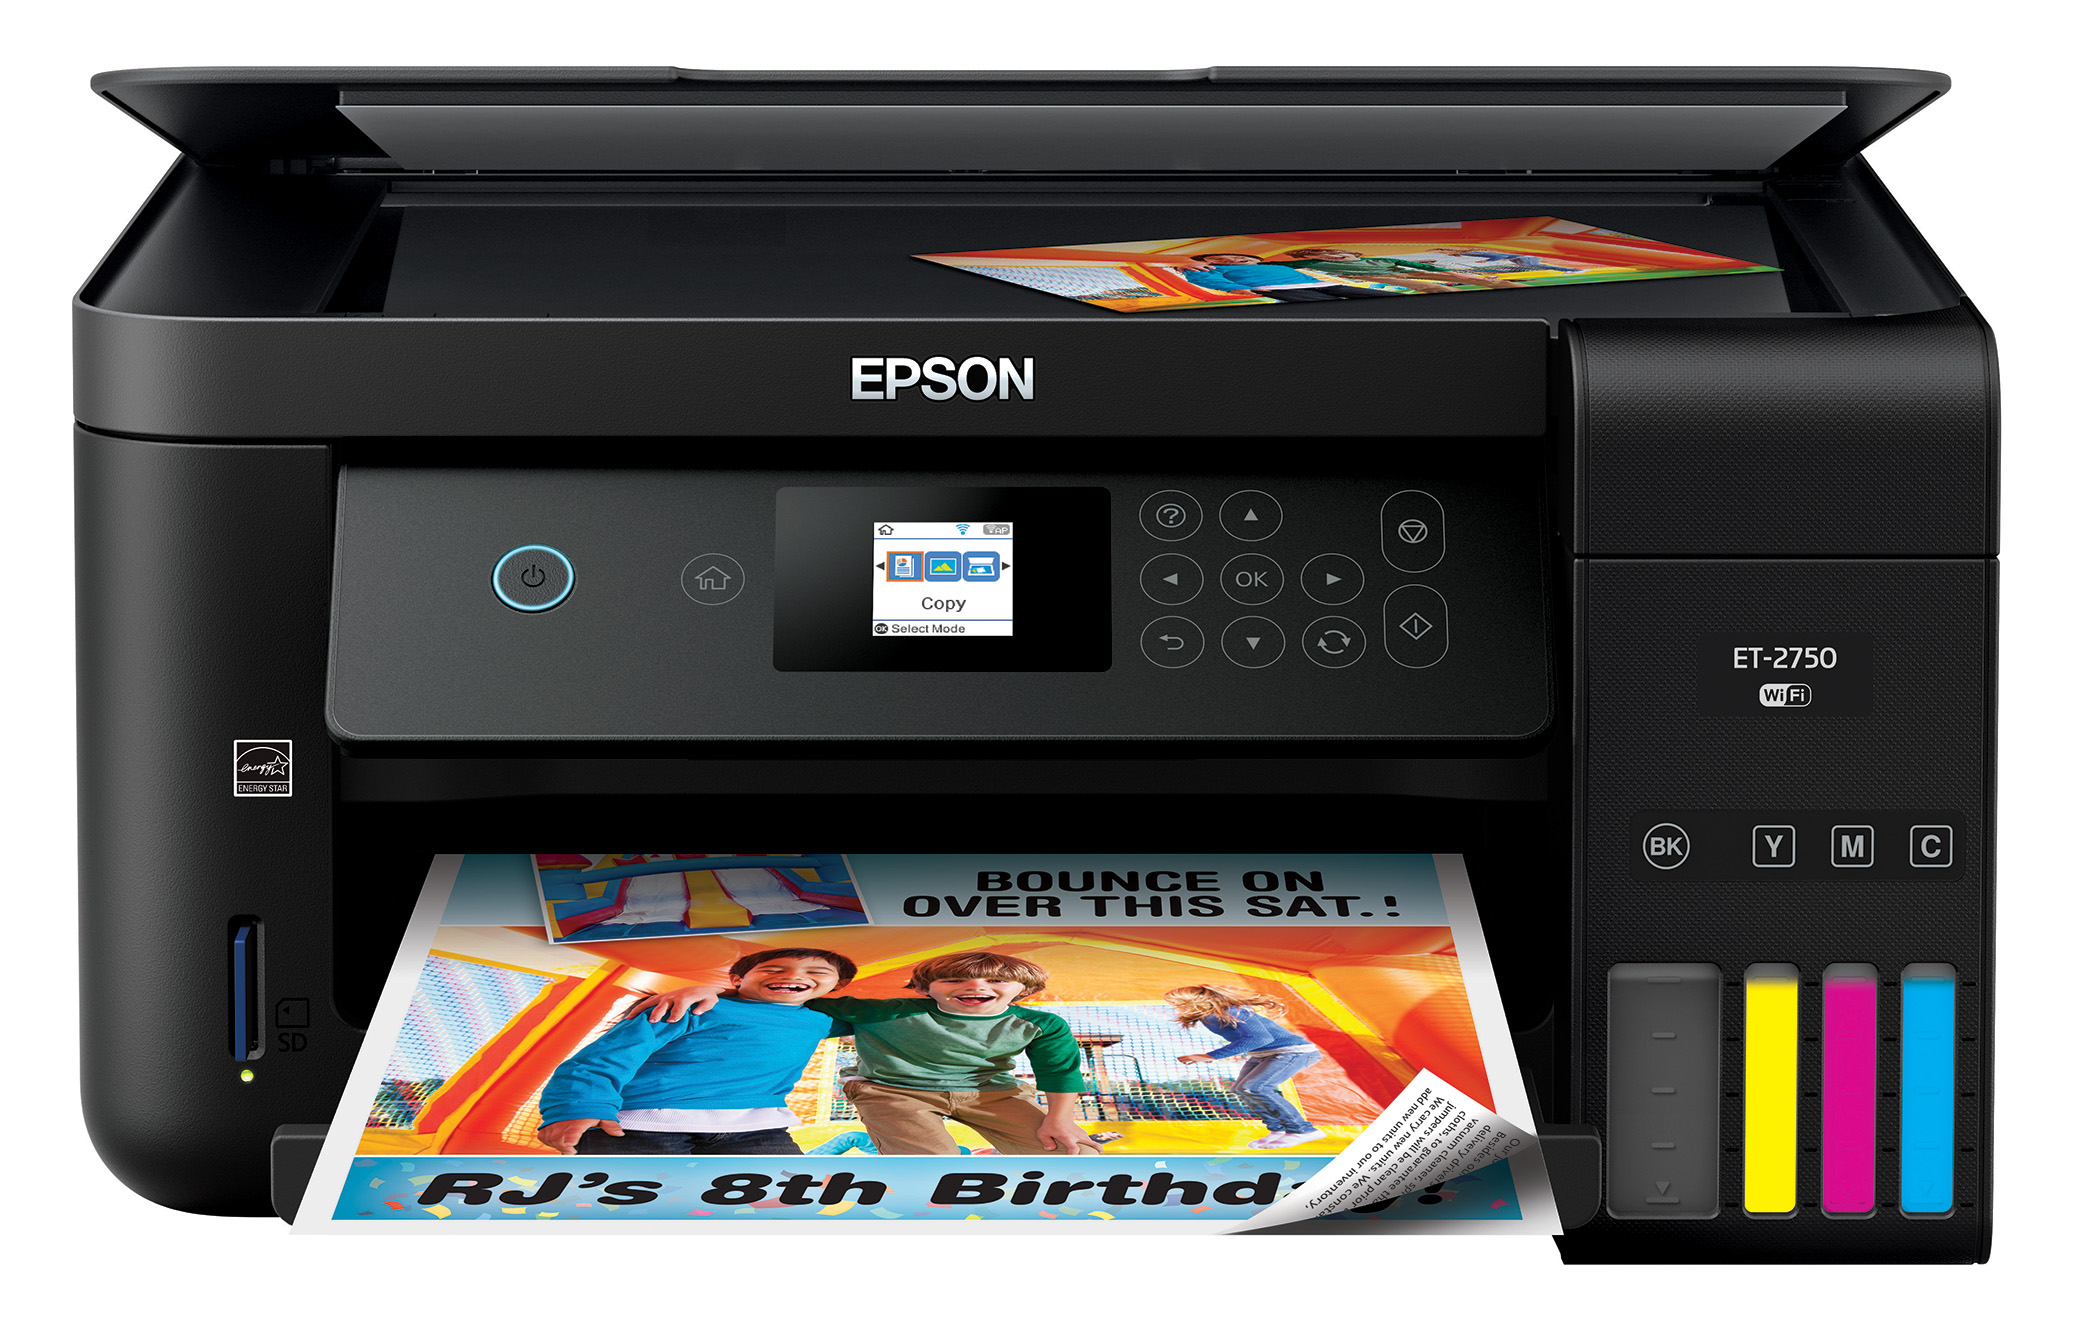  Epson  Expands All In One Supertank Printer Line and Improves